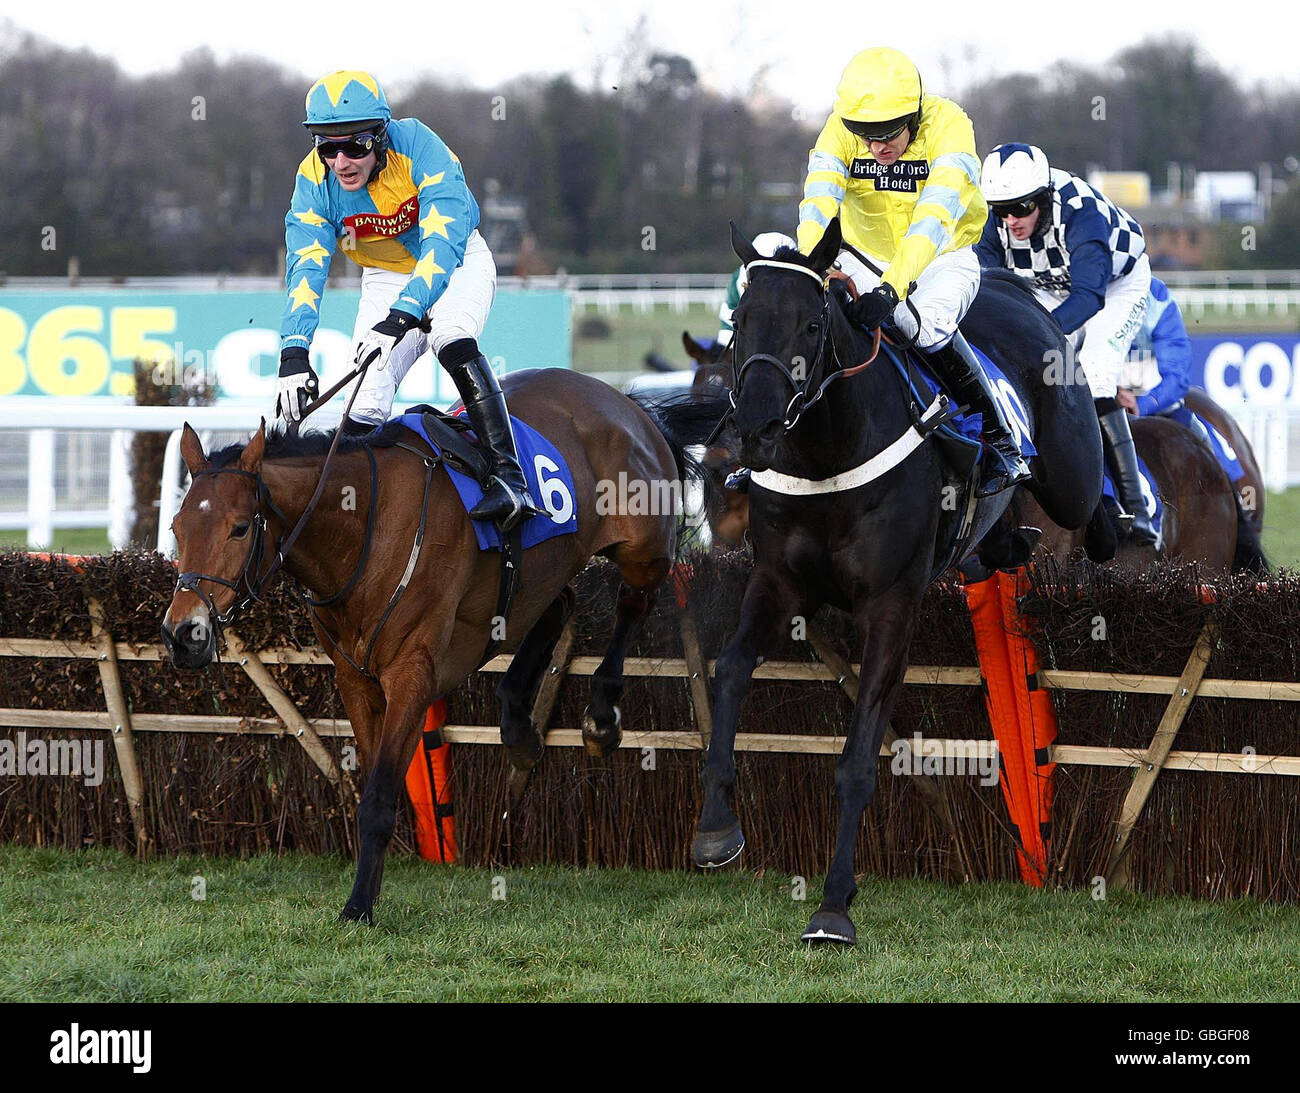 Don't Tell The Wife ridden by Barry Geraghty (yellow cap) goes on to win the Charles Stanley group plc countryside alliance handicap hurdle race at Sandown Park Racecourse, Surrey. Stock Photo